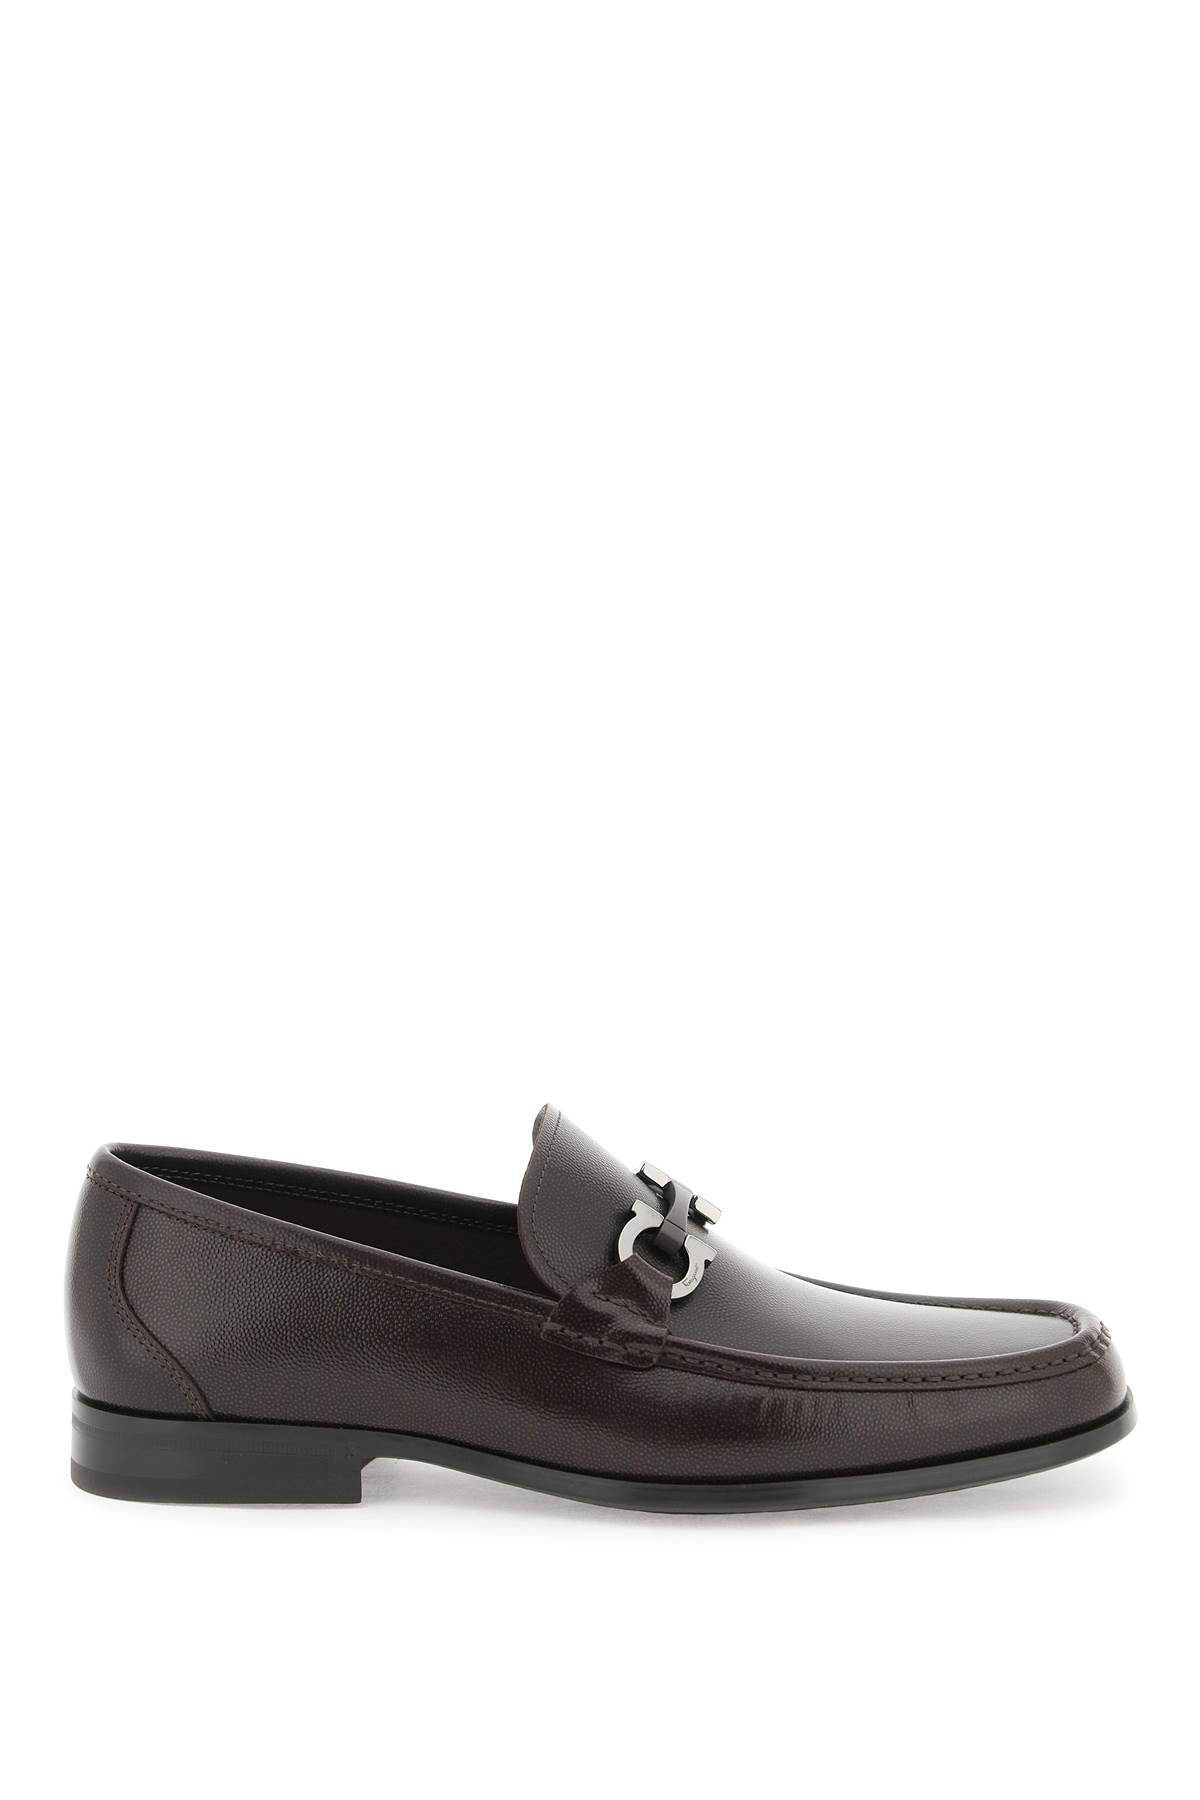 FERRAGAMO Embossed Leather Loafers with Gancini Hook Embellishments